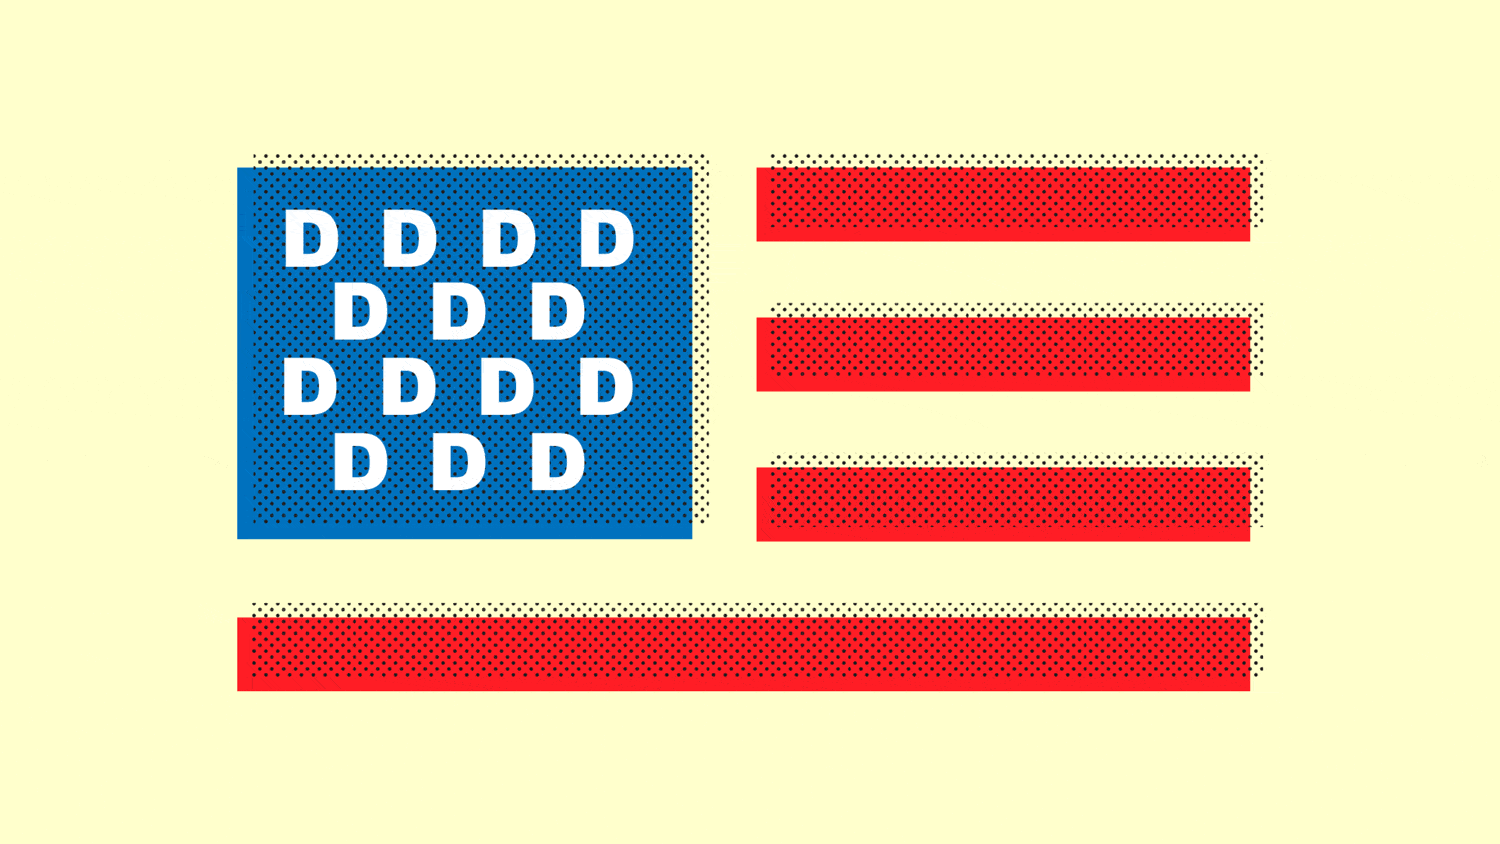 A gif of an American flag with D’s instead of stars that flips to R’s and back